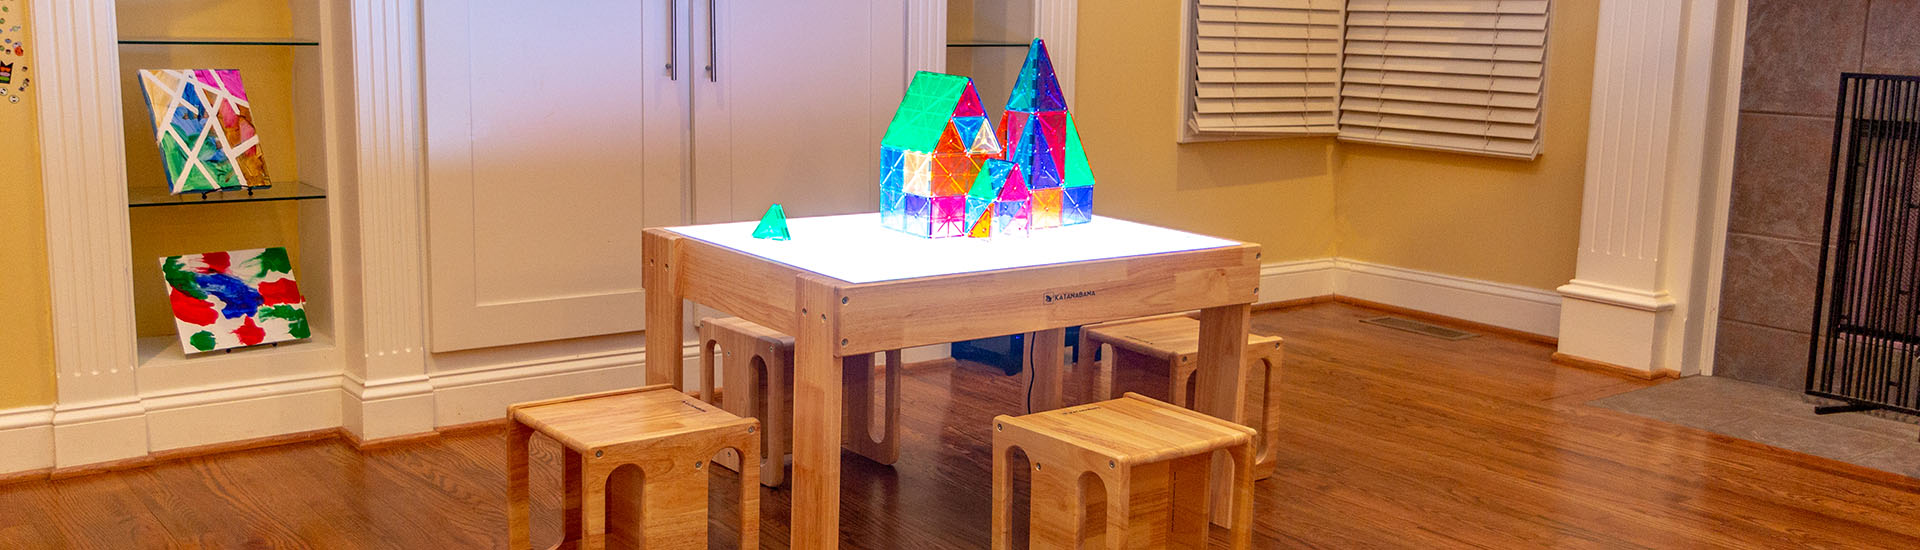 Montessori kids light table and activity table